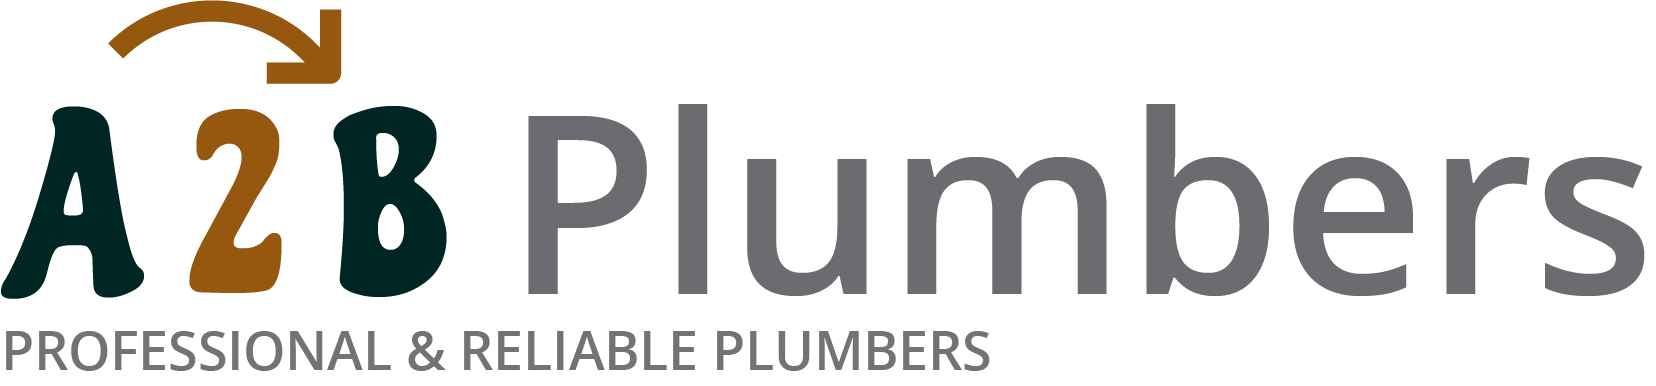 If you need a boiler installed, a radiator repaired or a leaking tap fixed, call us now - we provide services for properties in Poole and the local area.